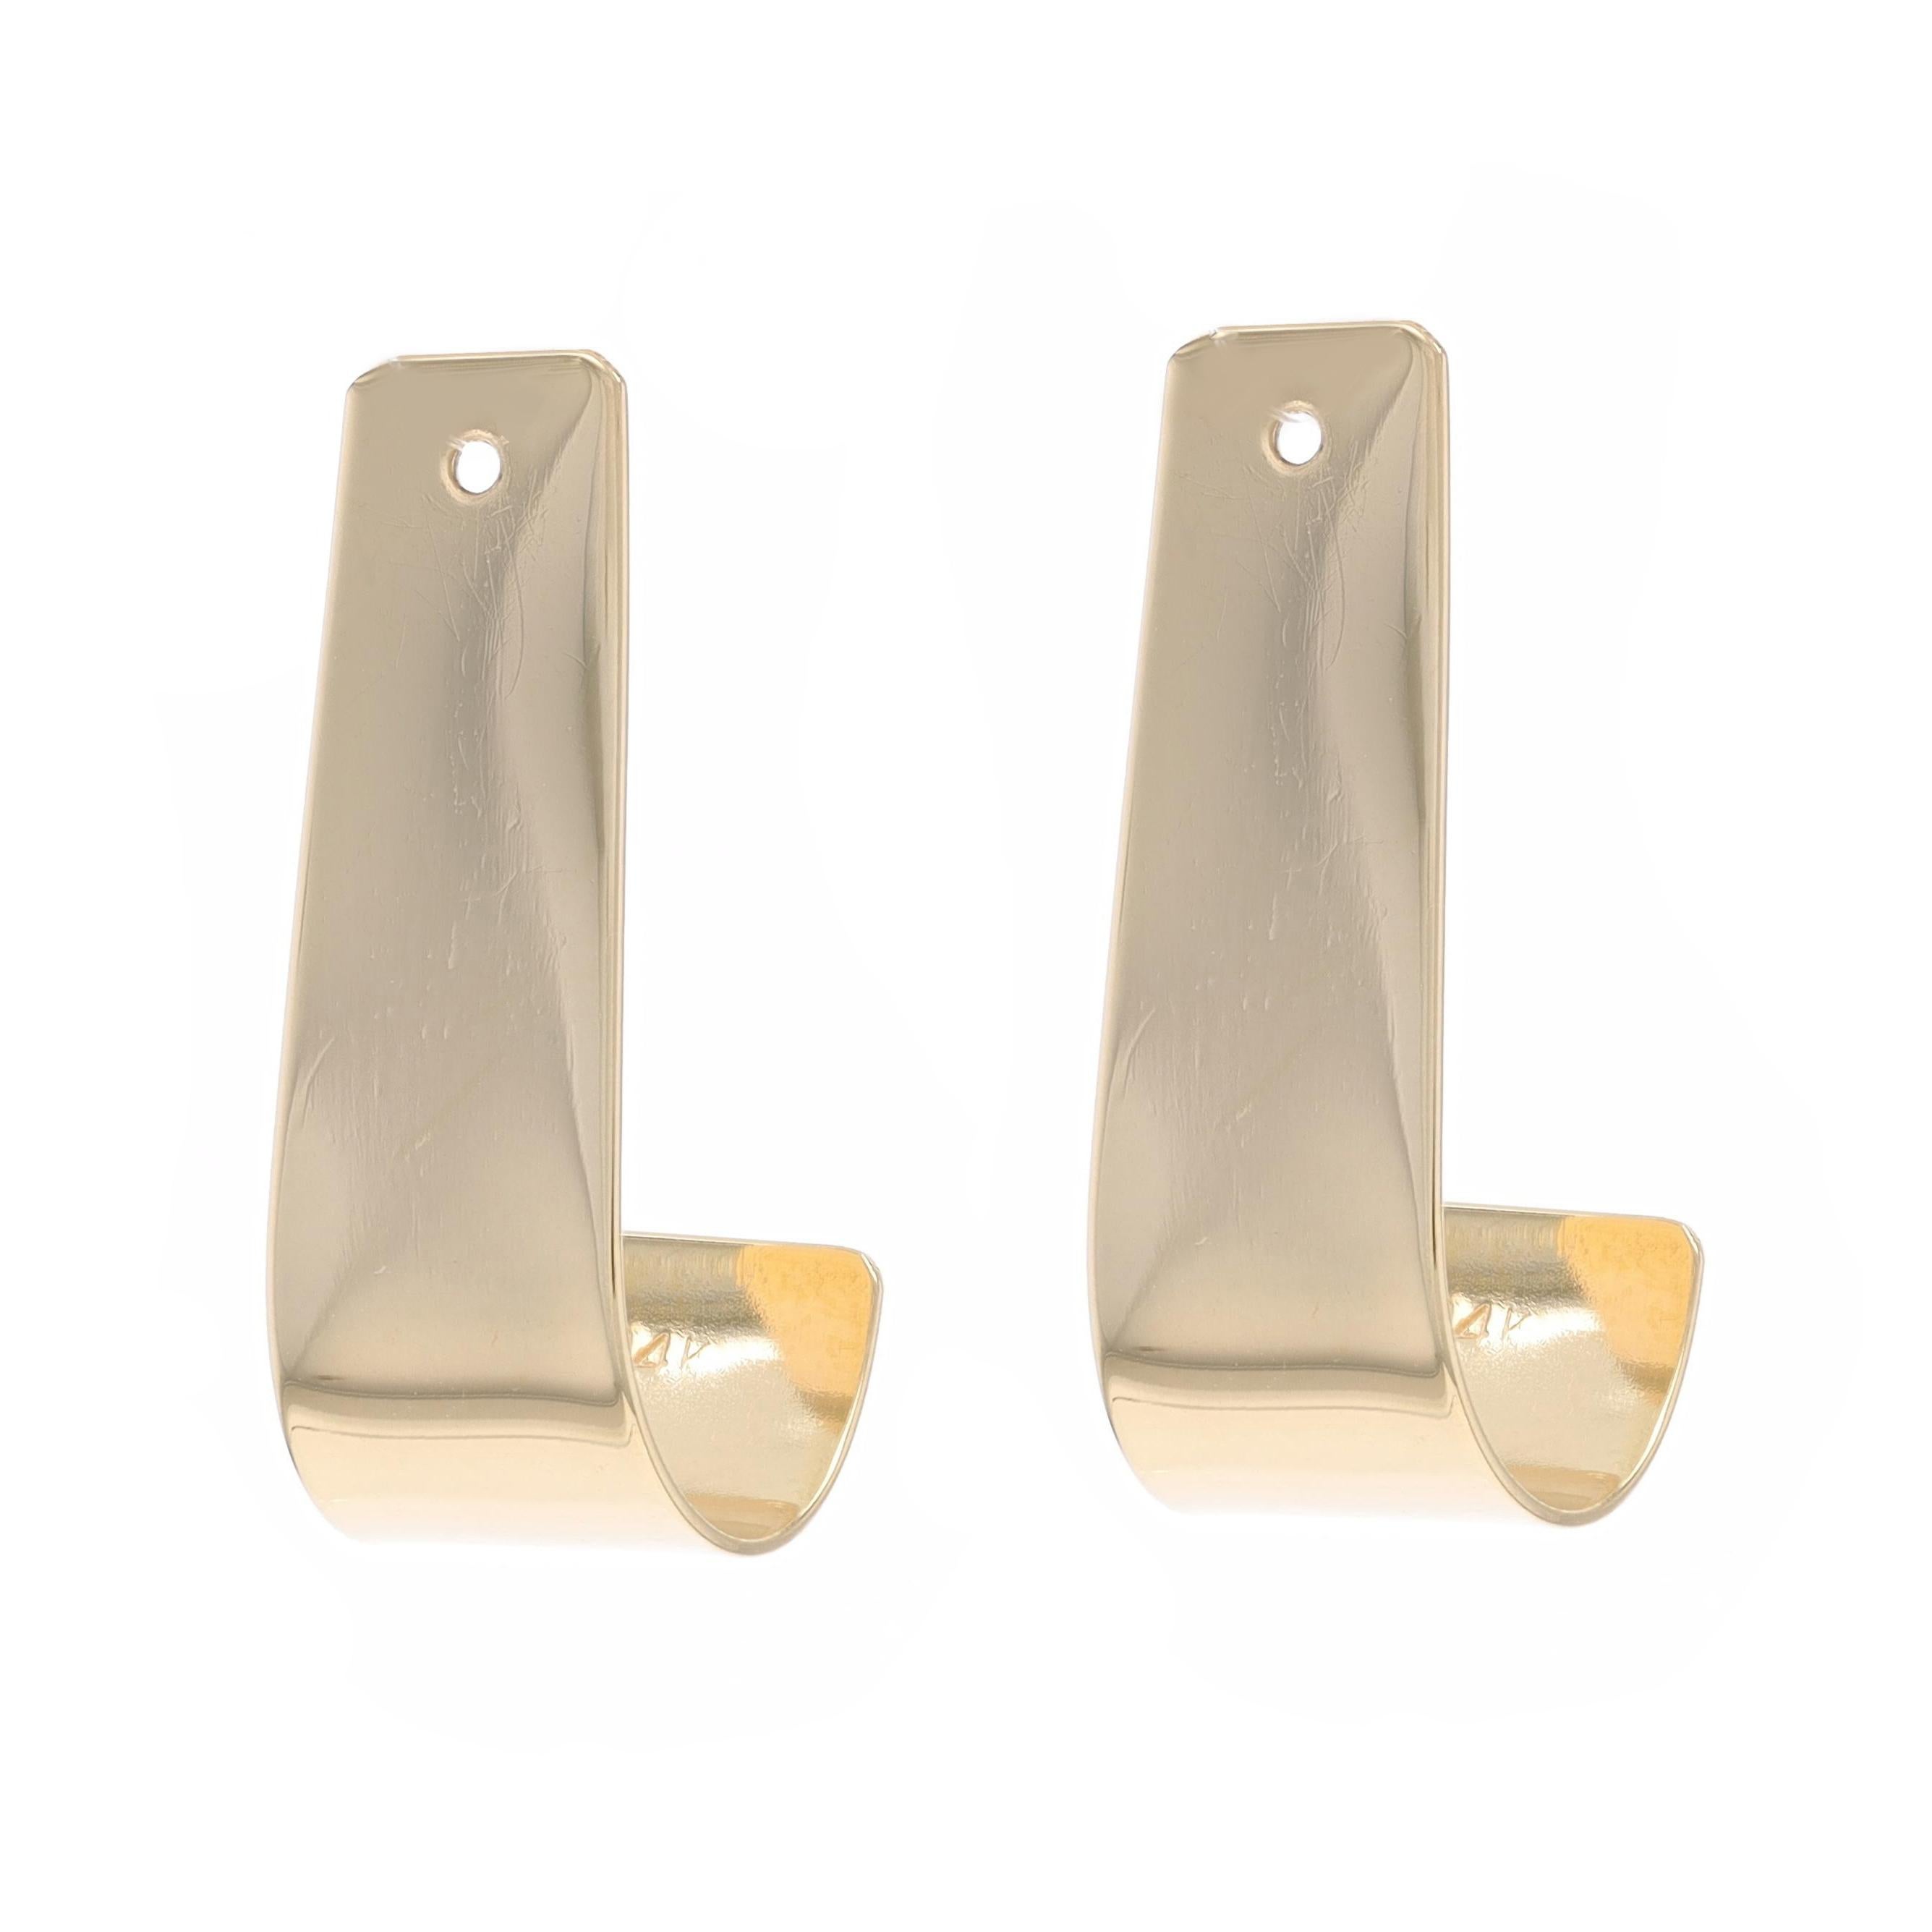 Metal Content: 14k Yellow Gold

Style: J-Hook Earring Enhancer Stud Jackets

Measurements
Tall: 1 1/32